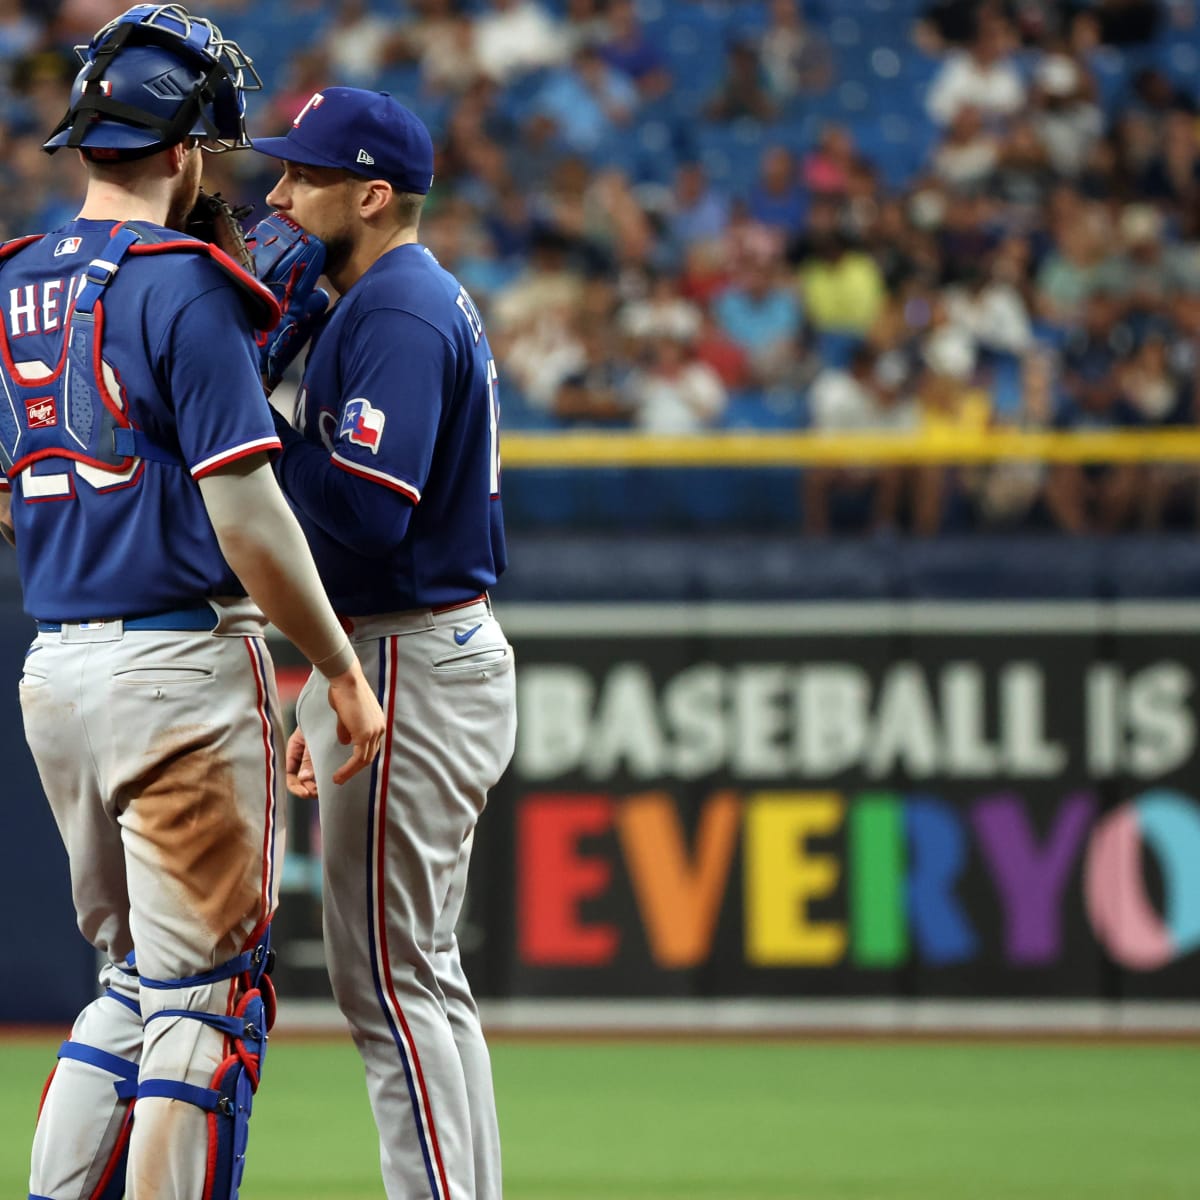 NYC pride organization says Rangers' last-minute decision to ditch